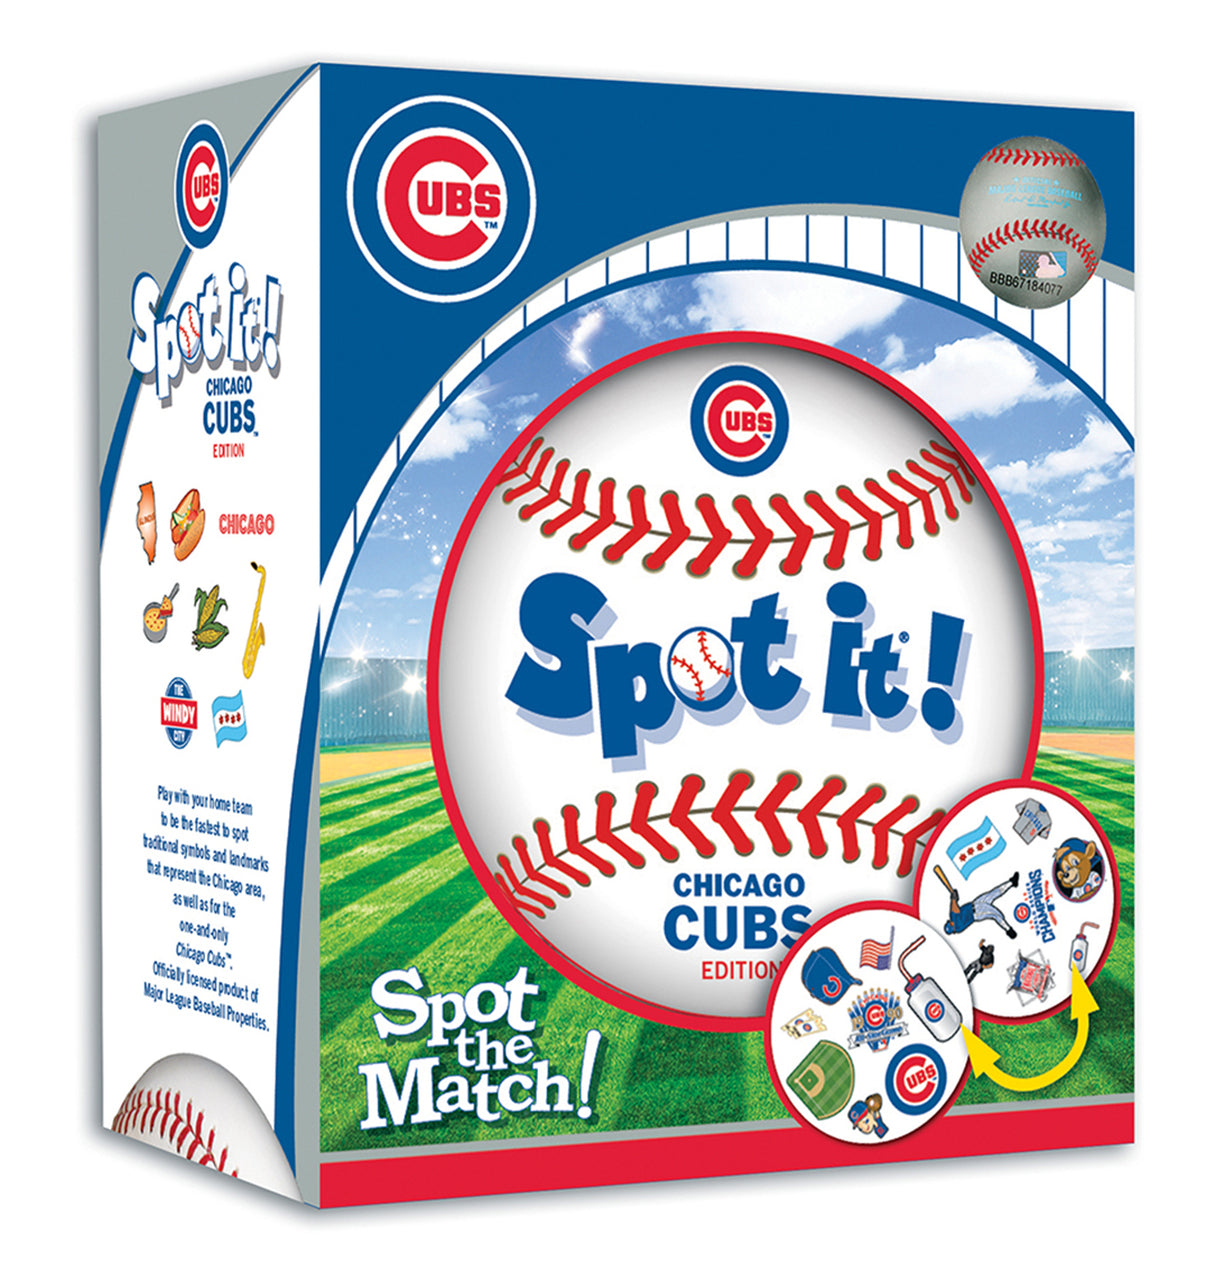 CHICAGO CUBS SPOT IT! CARD GAME